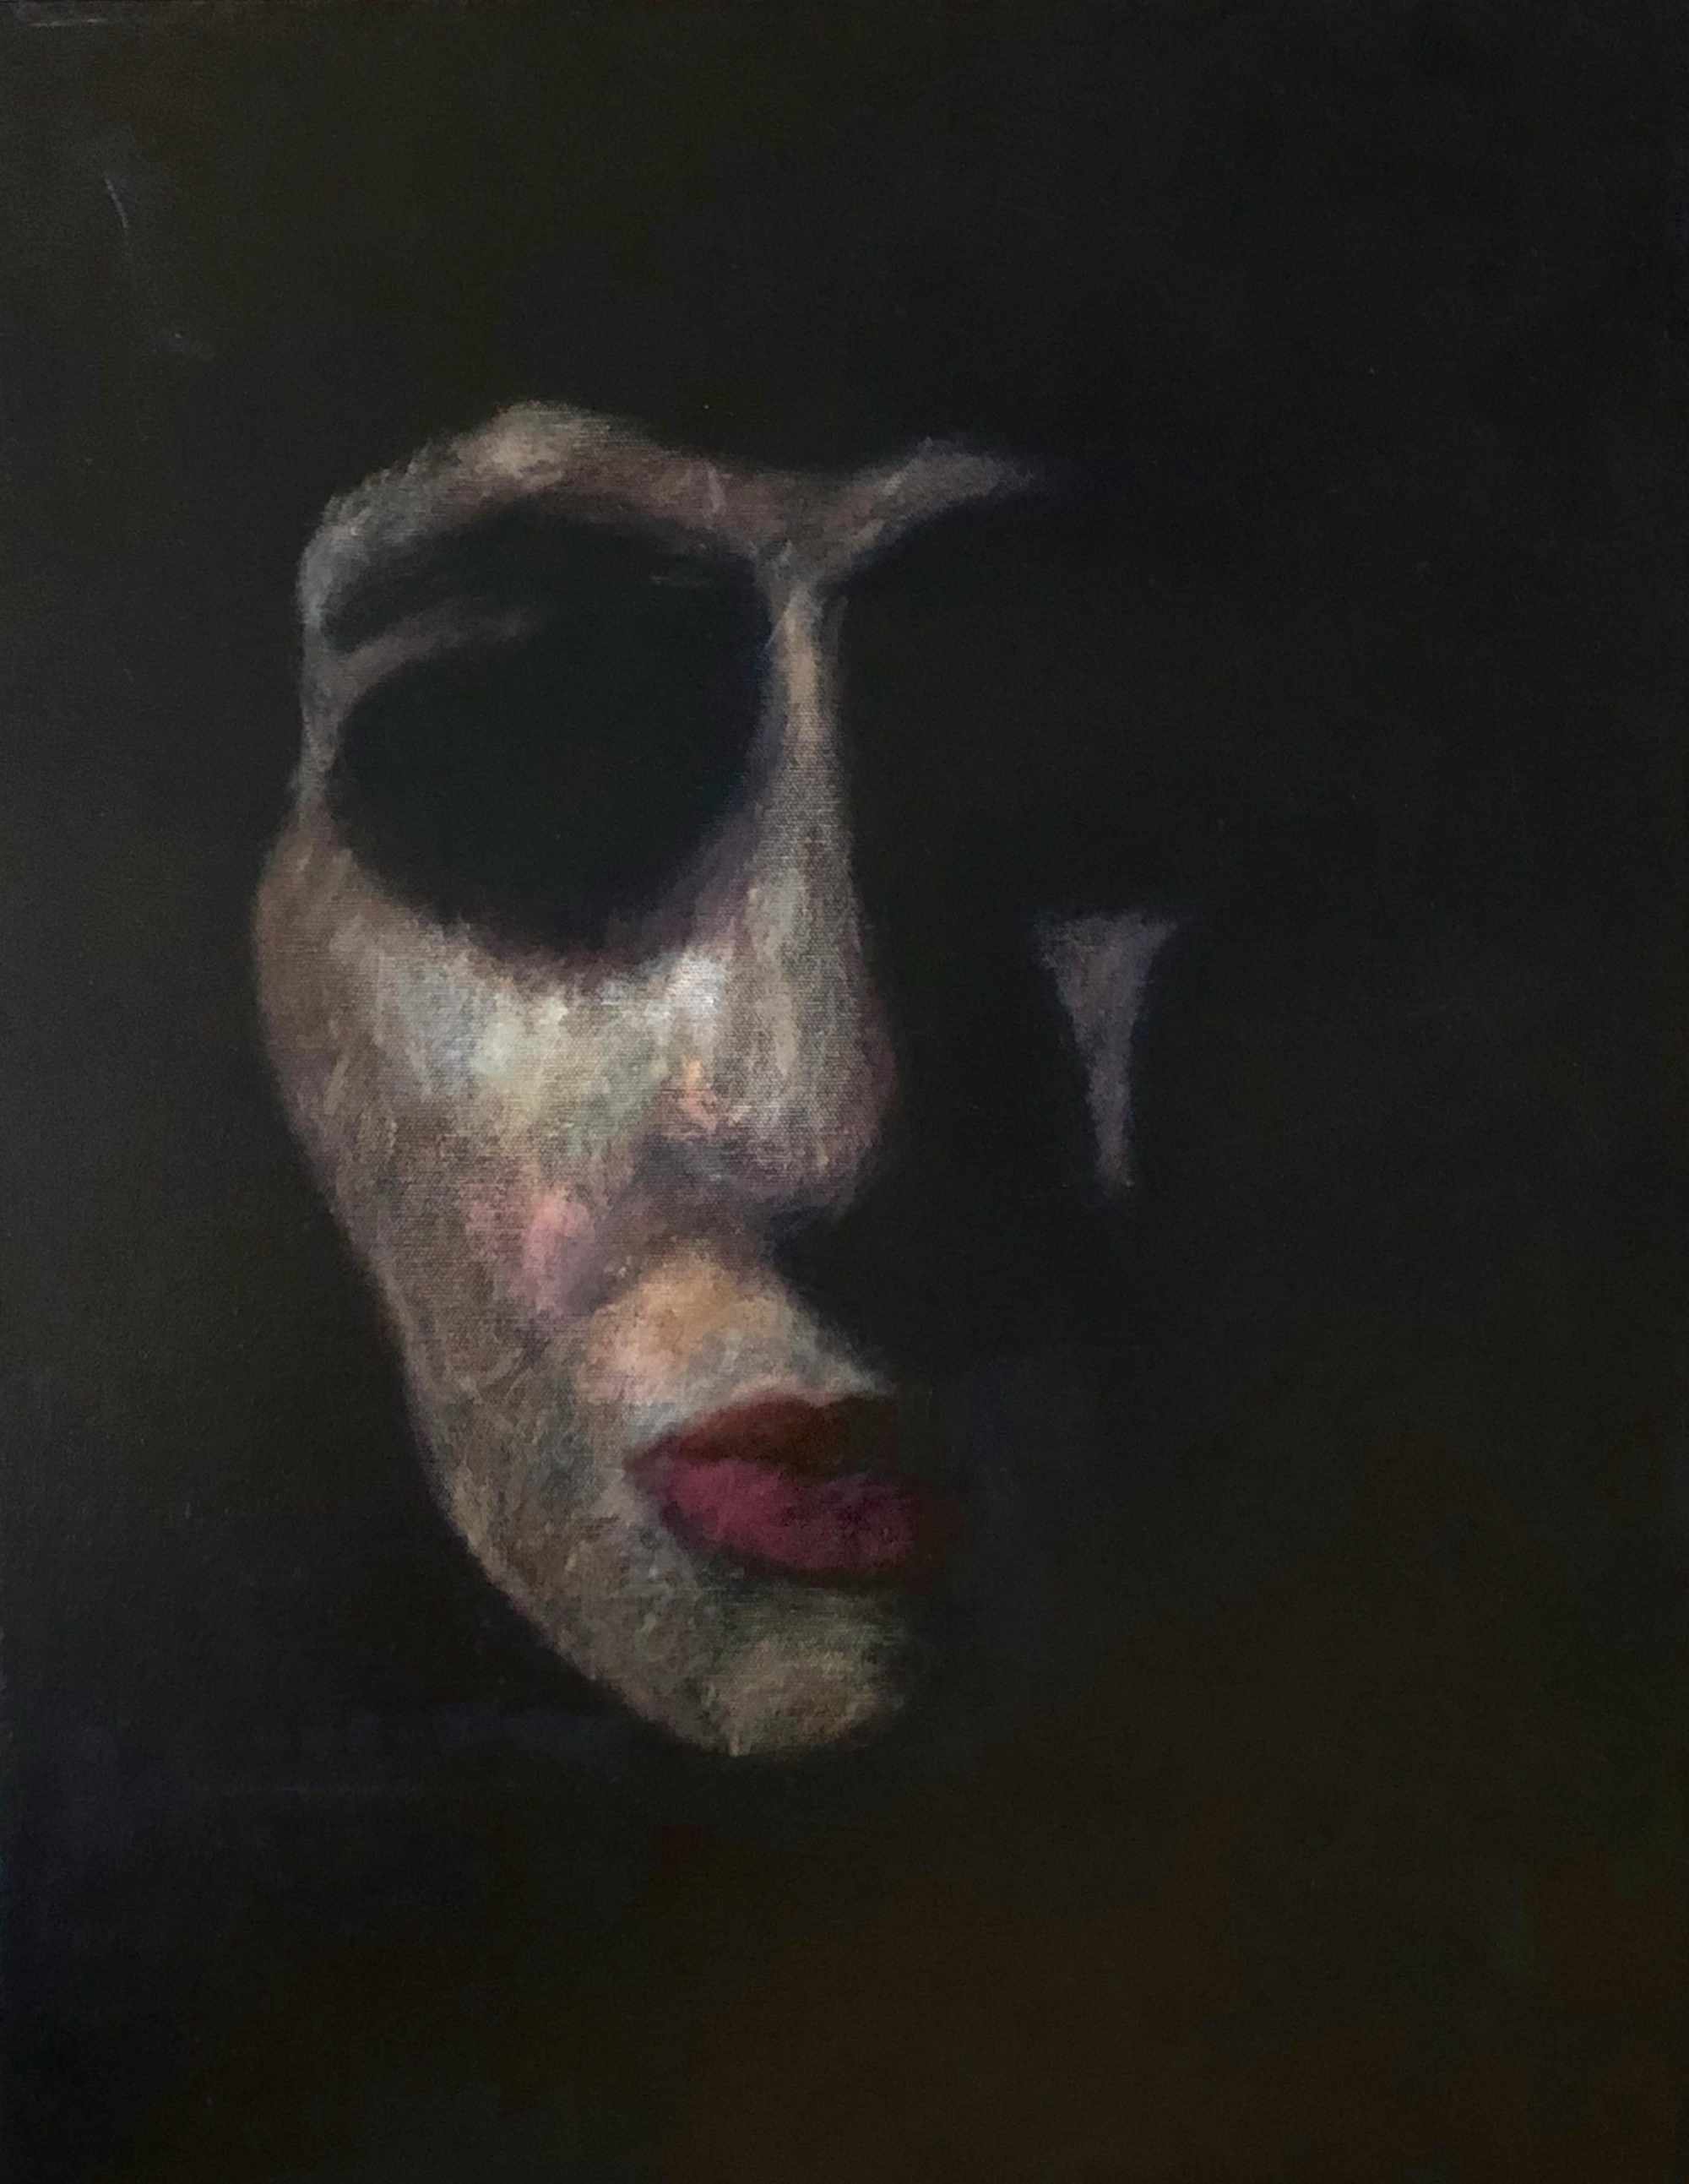 Womanliness As Mask - Polymer on Canvas -  460 x 610mm